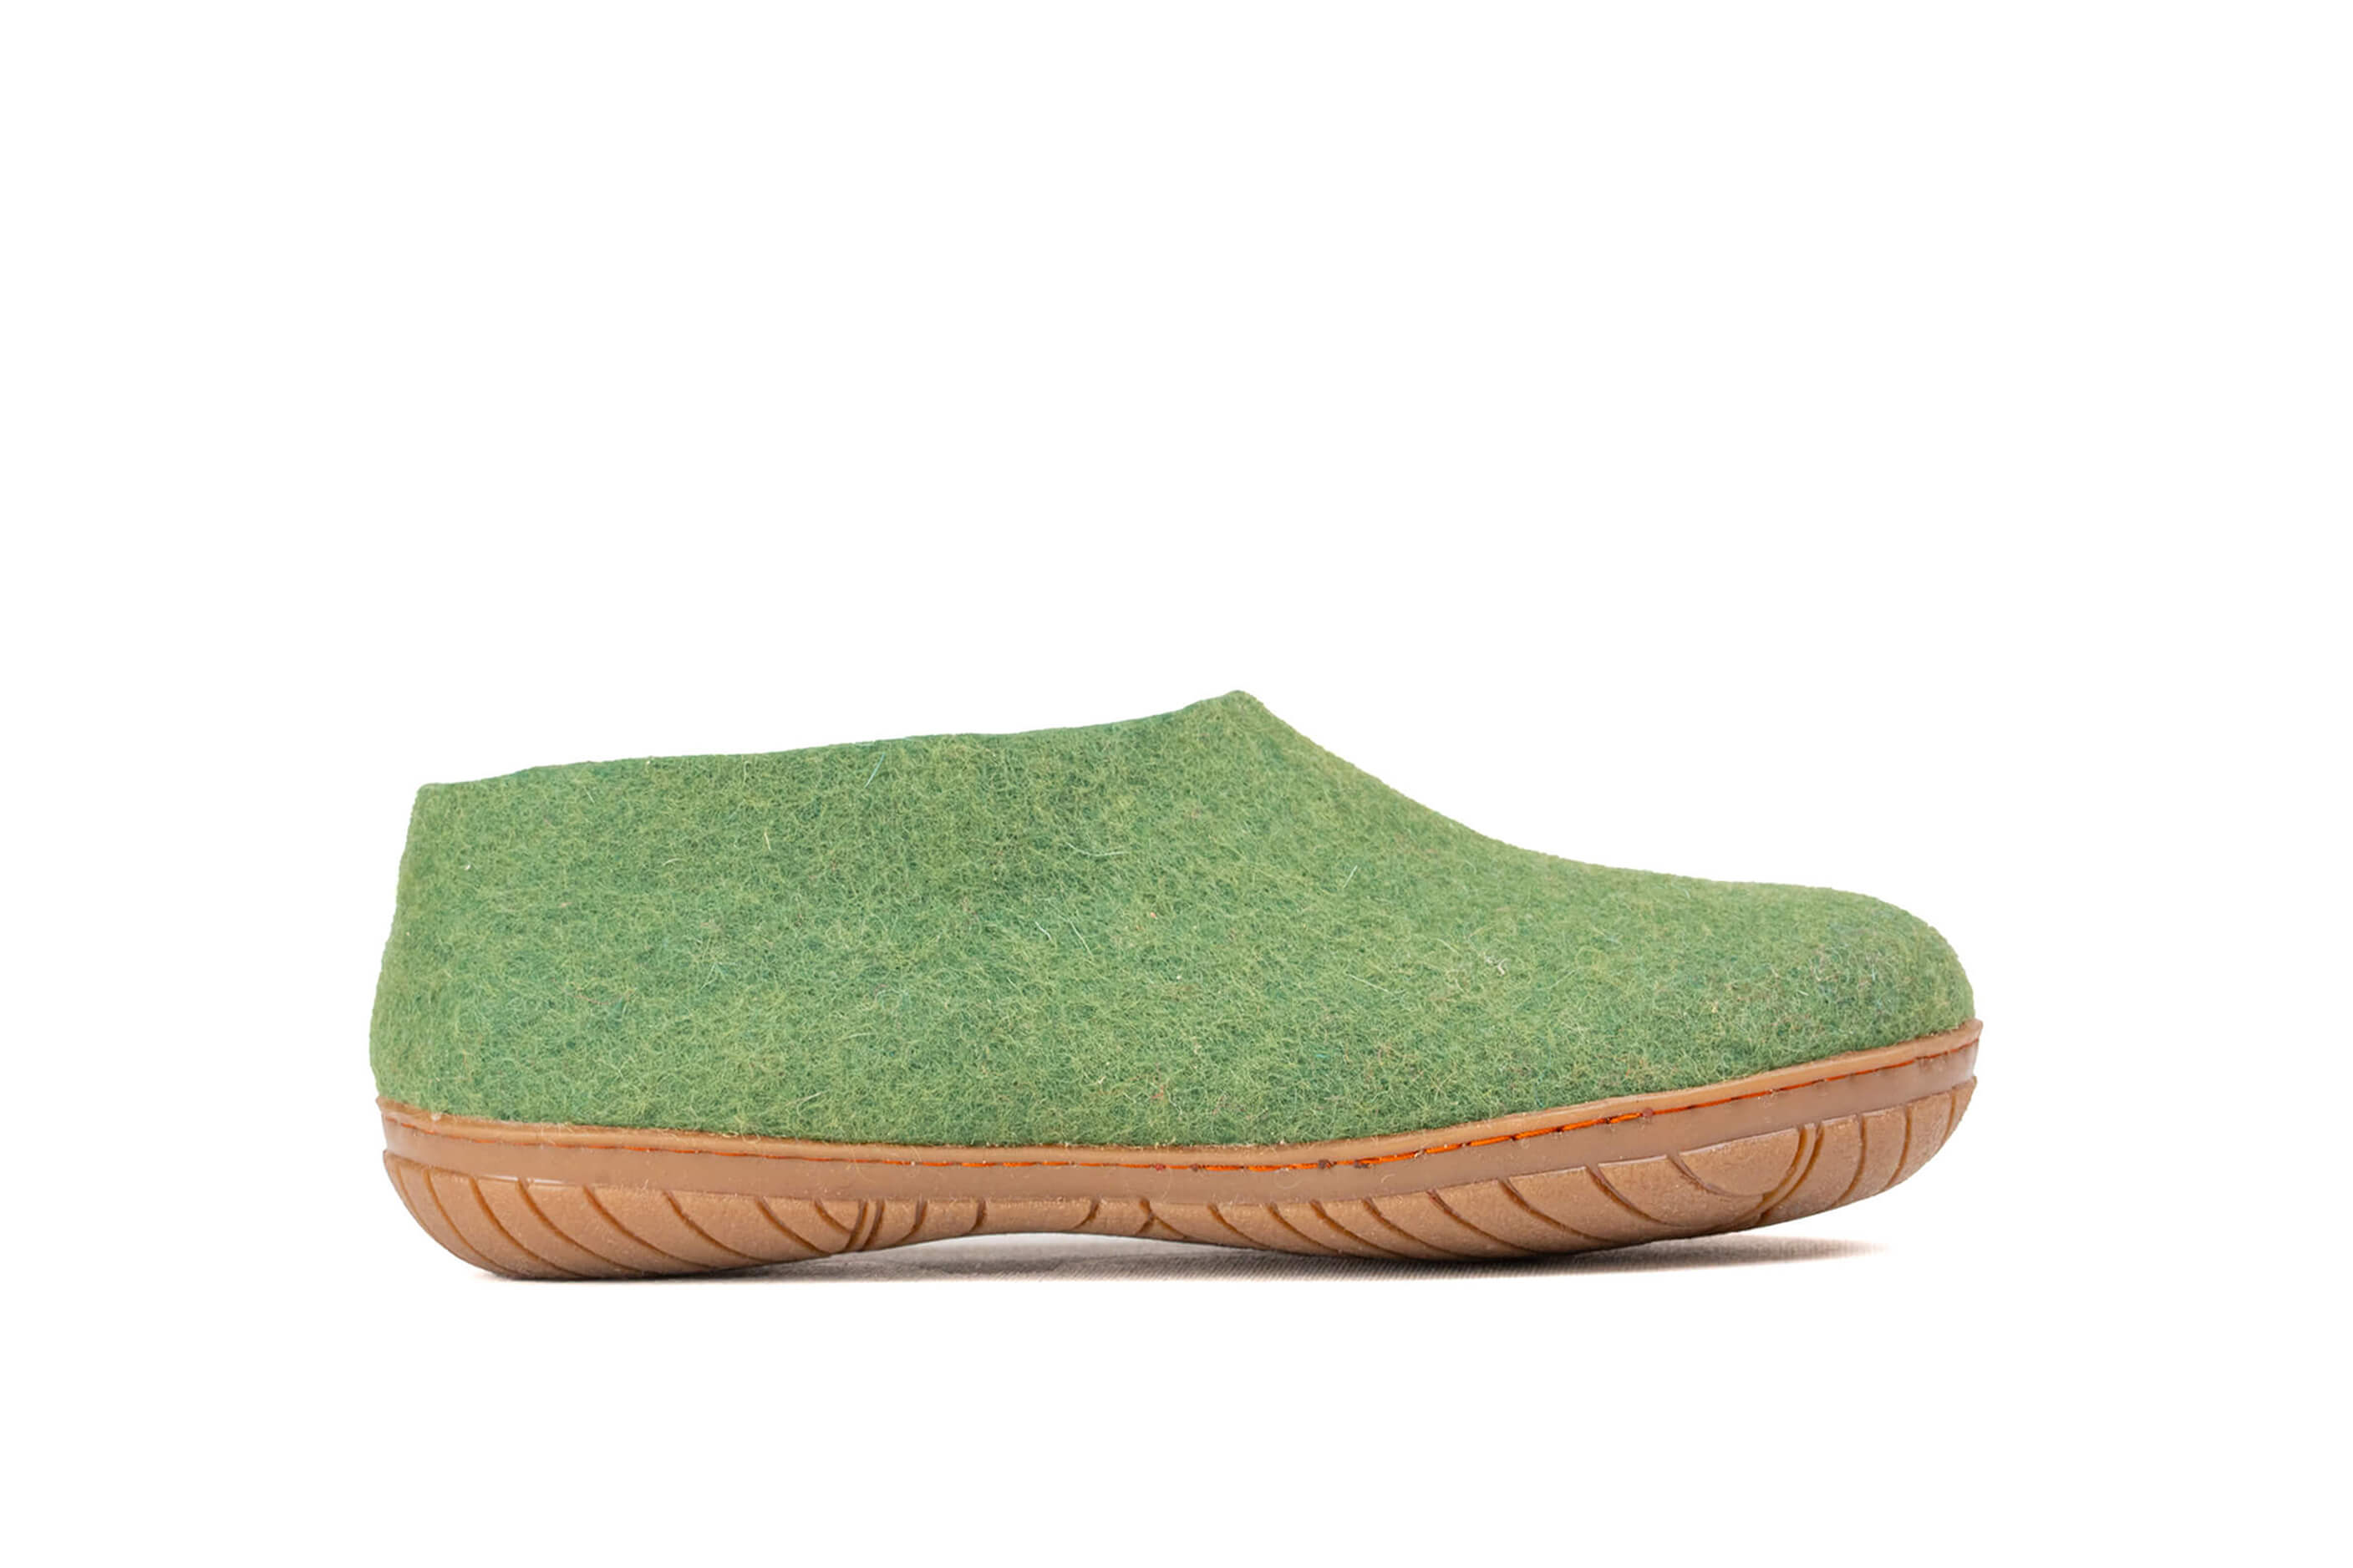 Outdoor Shoes With Rubber Sole - Green